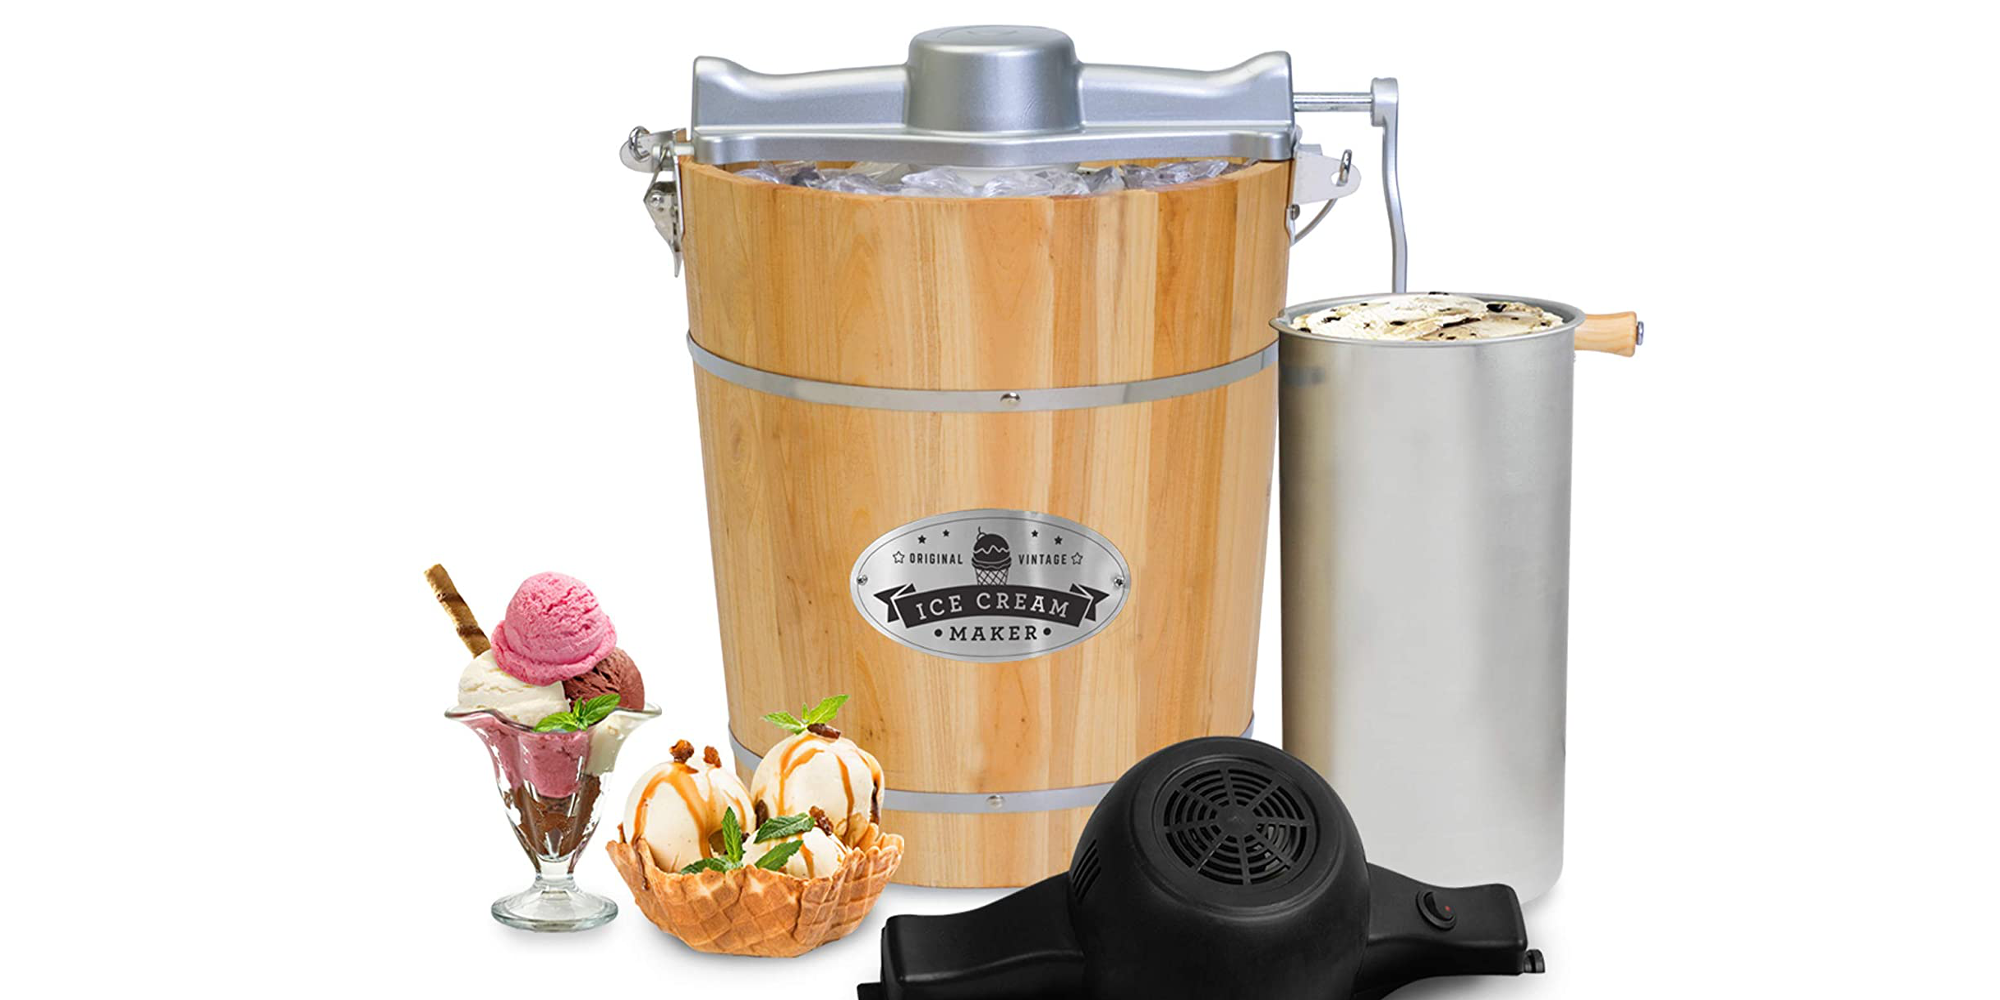 https://9to5toys.com/wp-content/uploads/sites/5/2022/03/Elite-Gourmet-Old-Fashioned-Vintage-Appalachian-Wood-Bucket-Electric-Ice-Cream-Maker.png